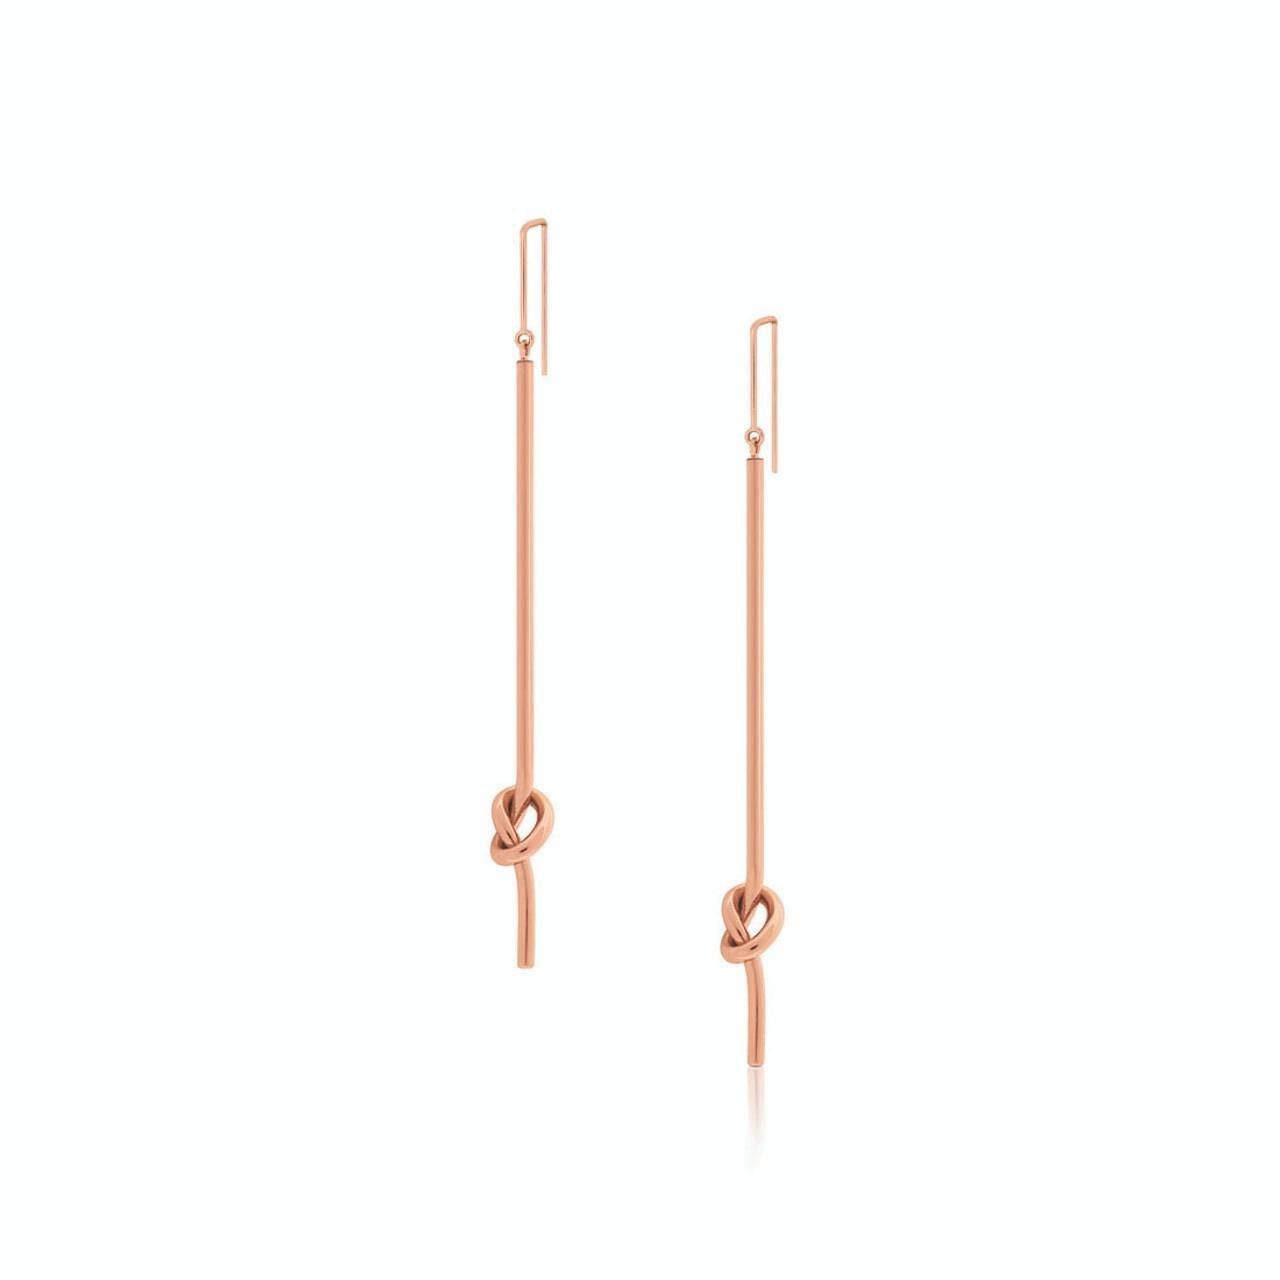 Romi Dublin Rose Gold Knot Drop Earrings  Simple and understated this collection has a contemporary and sleek look that will allow you to accessorise with any outfit.